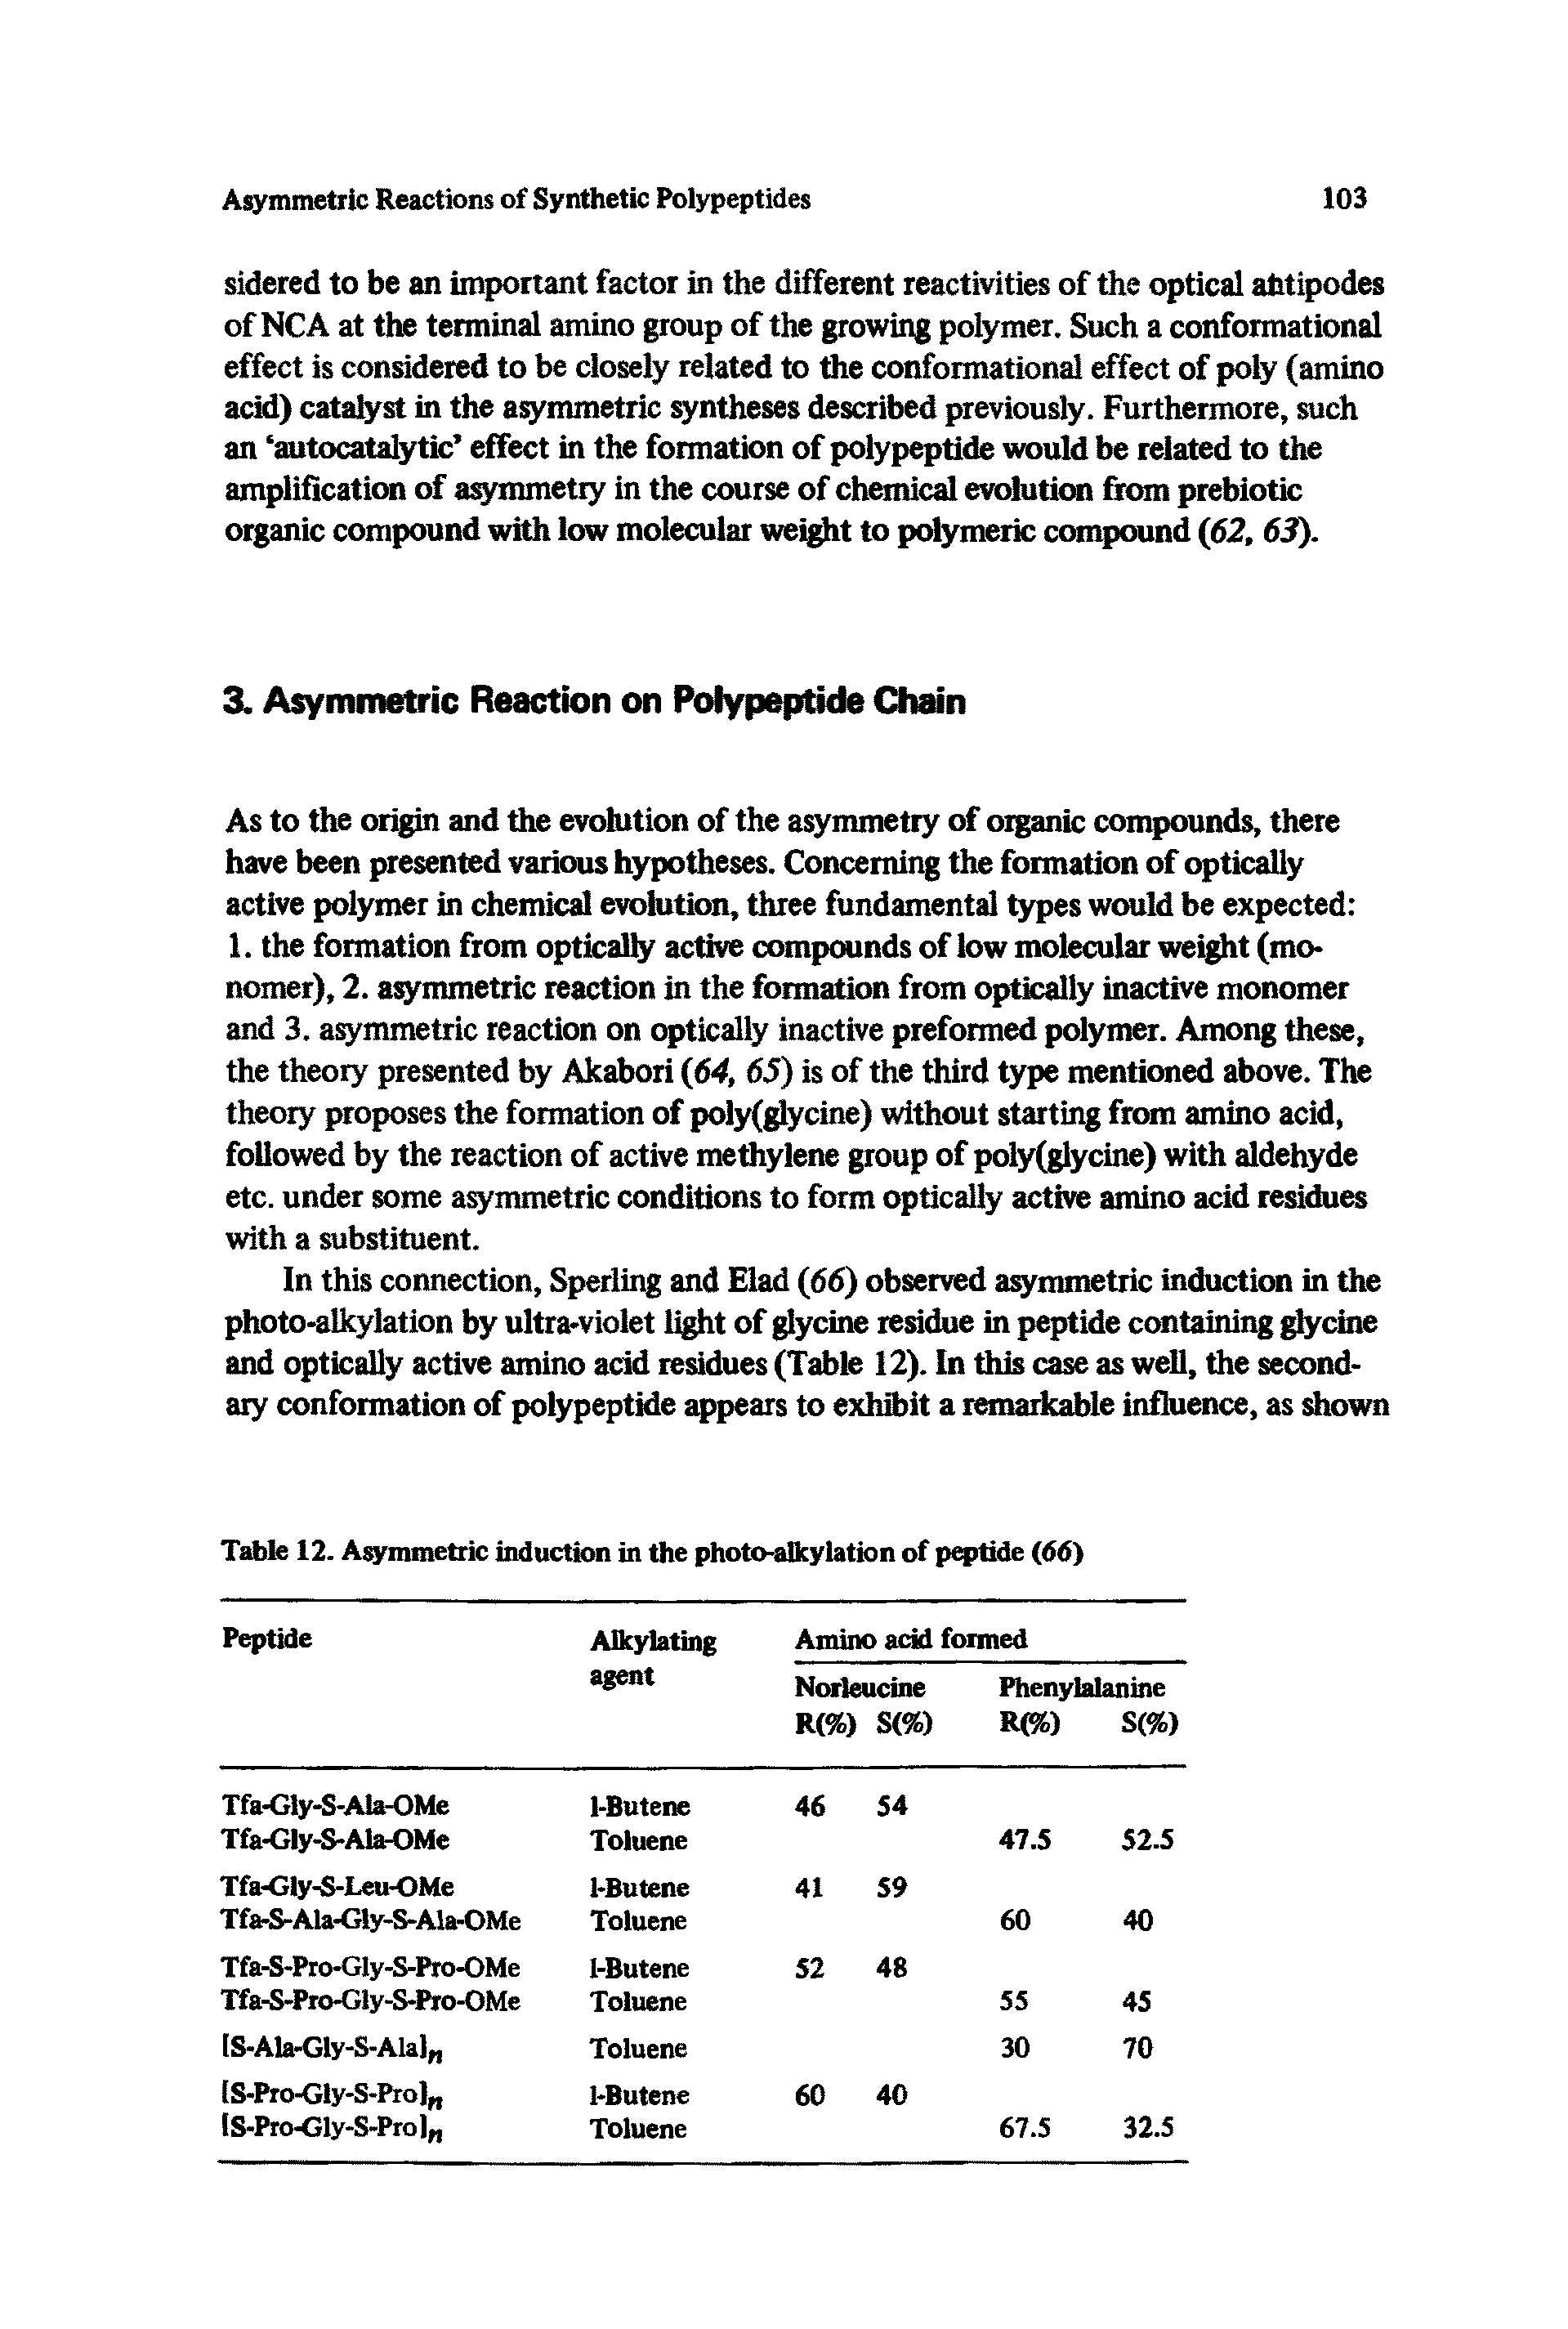 Table 12. Asymmetric induction in the photo-alkylation of peptide (66)...